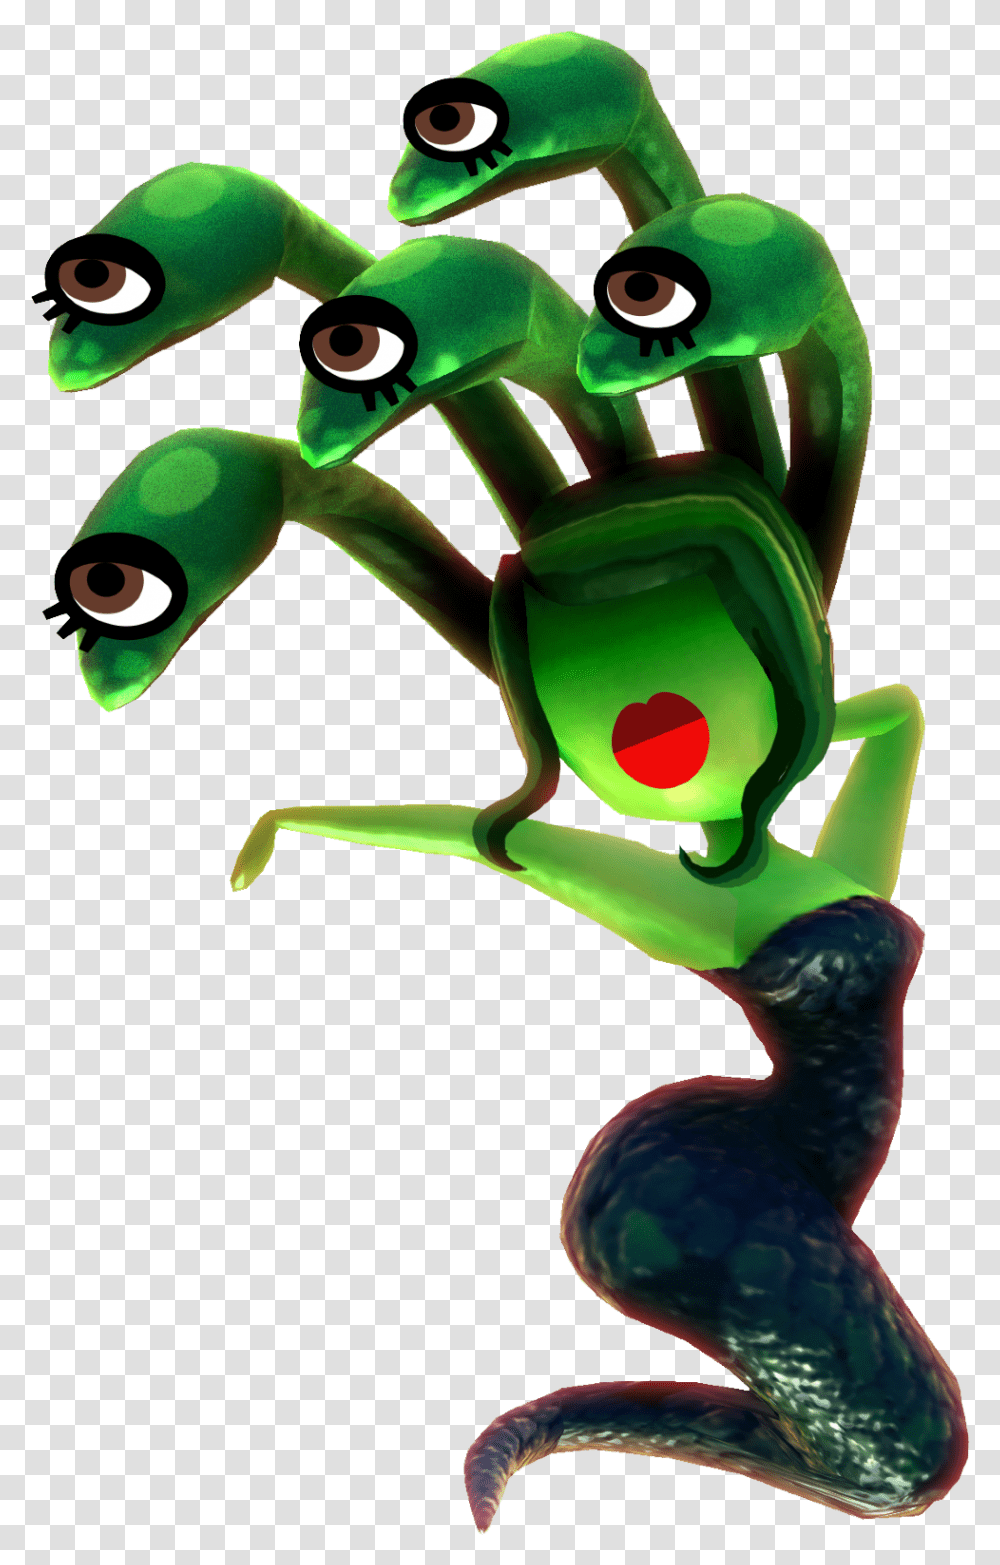 Medusa Image With No Background Miitopia Monsters, Toy, Animal, Insect, Invertebrate Transparent Png